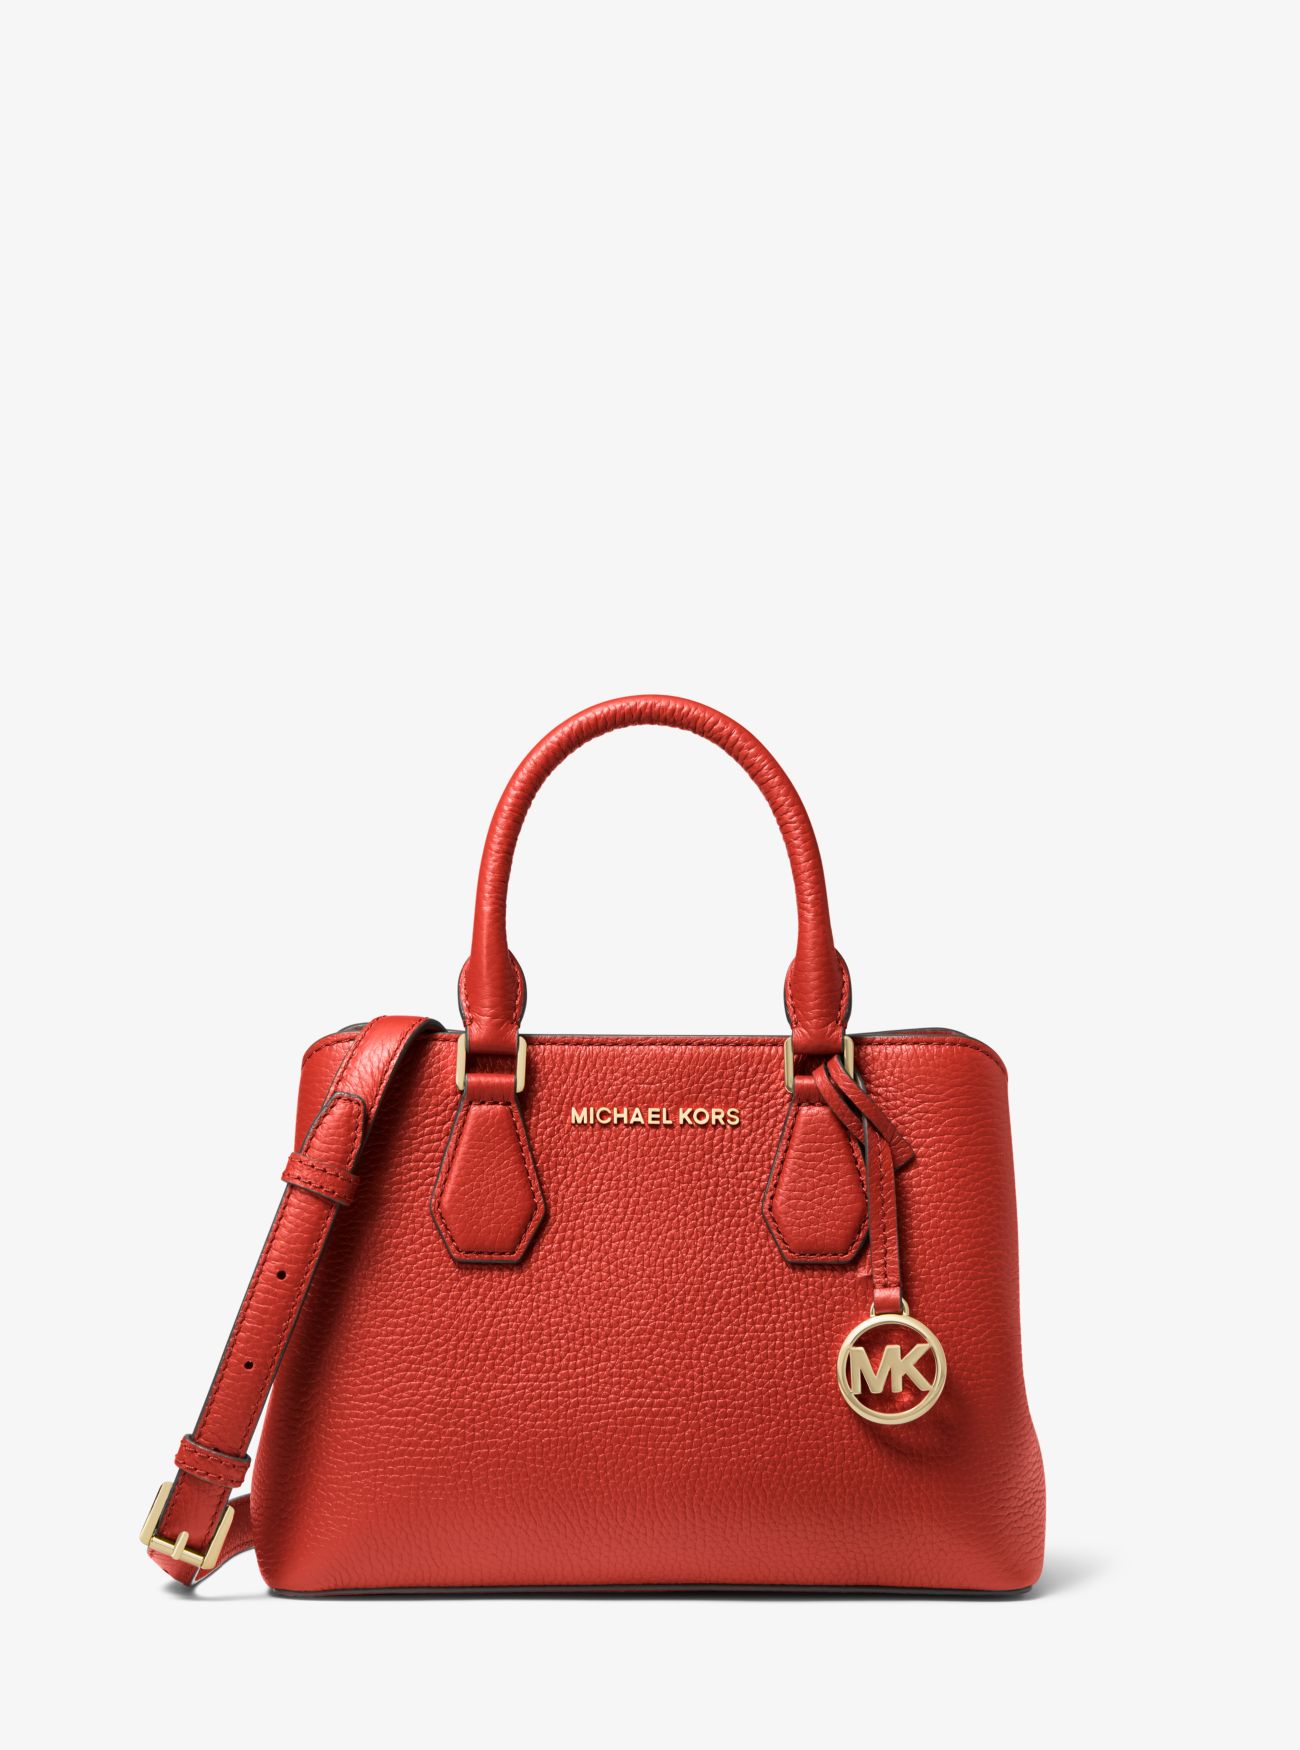 MK Camille Small Pebbled Leather Satchel - Br Terractta - Michael Kors